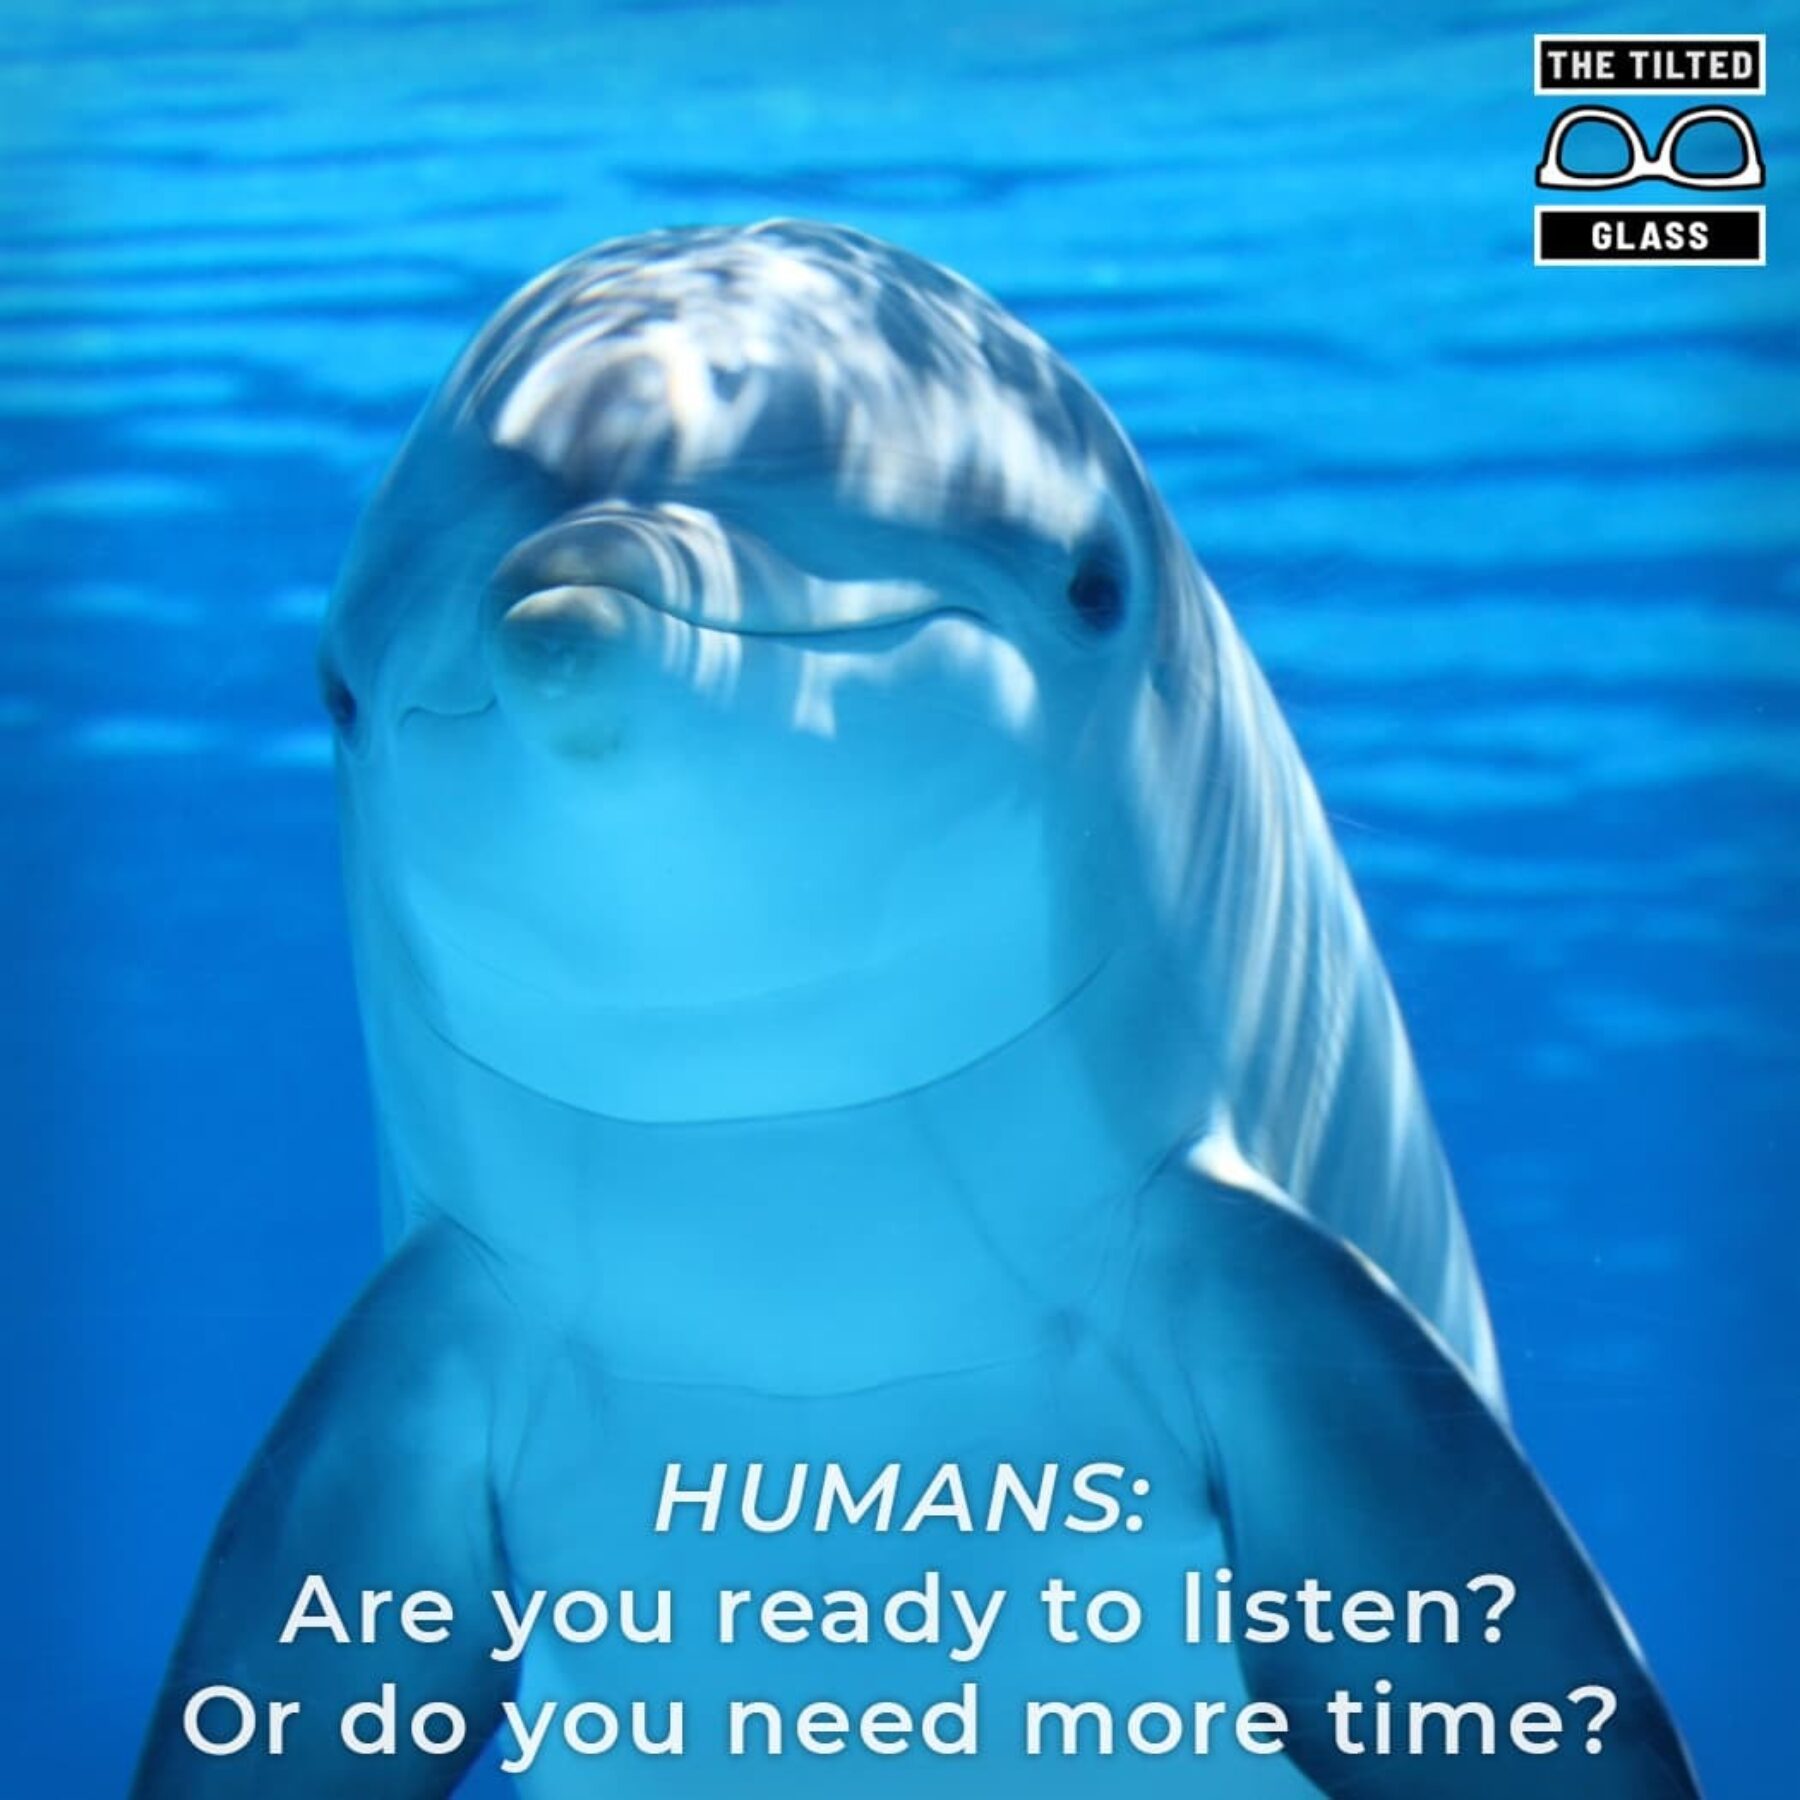 HUMANS: Are you ready to listen? Or do you need more time?